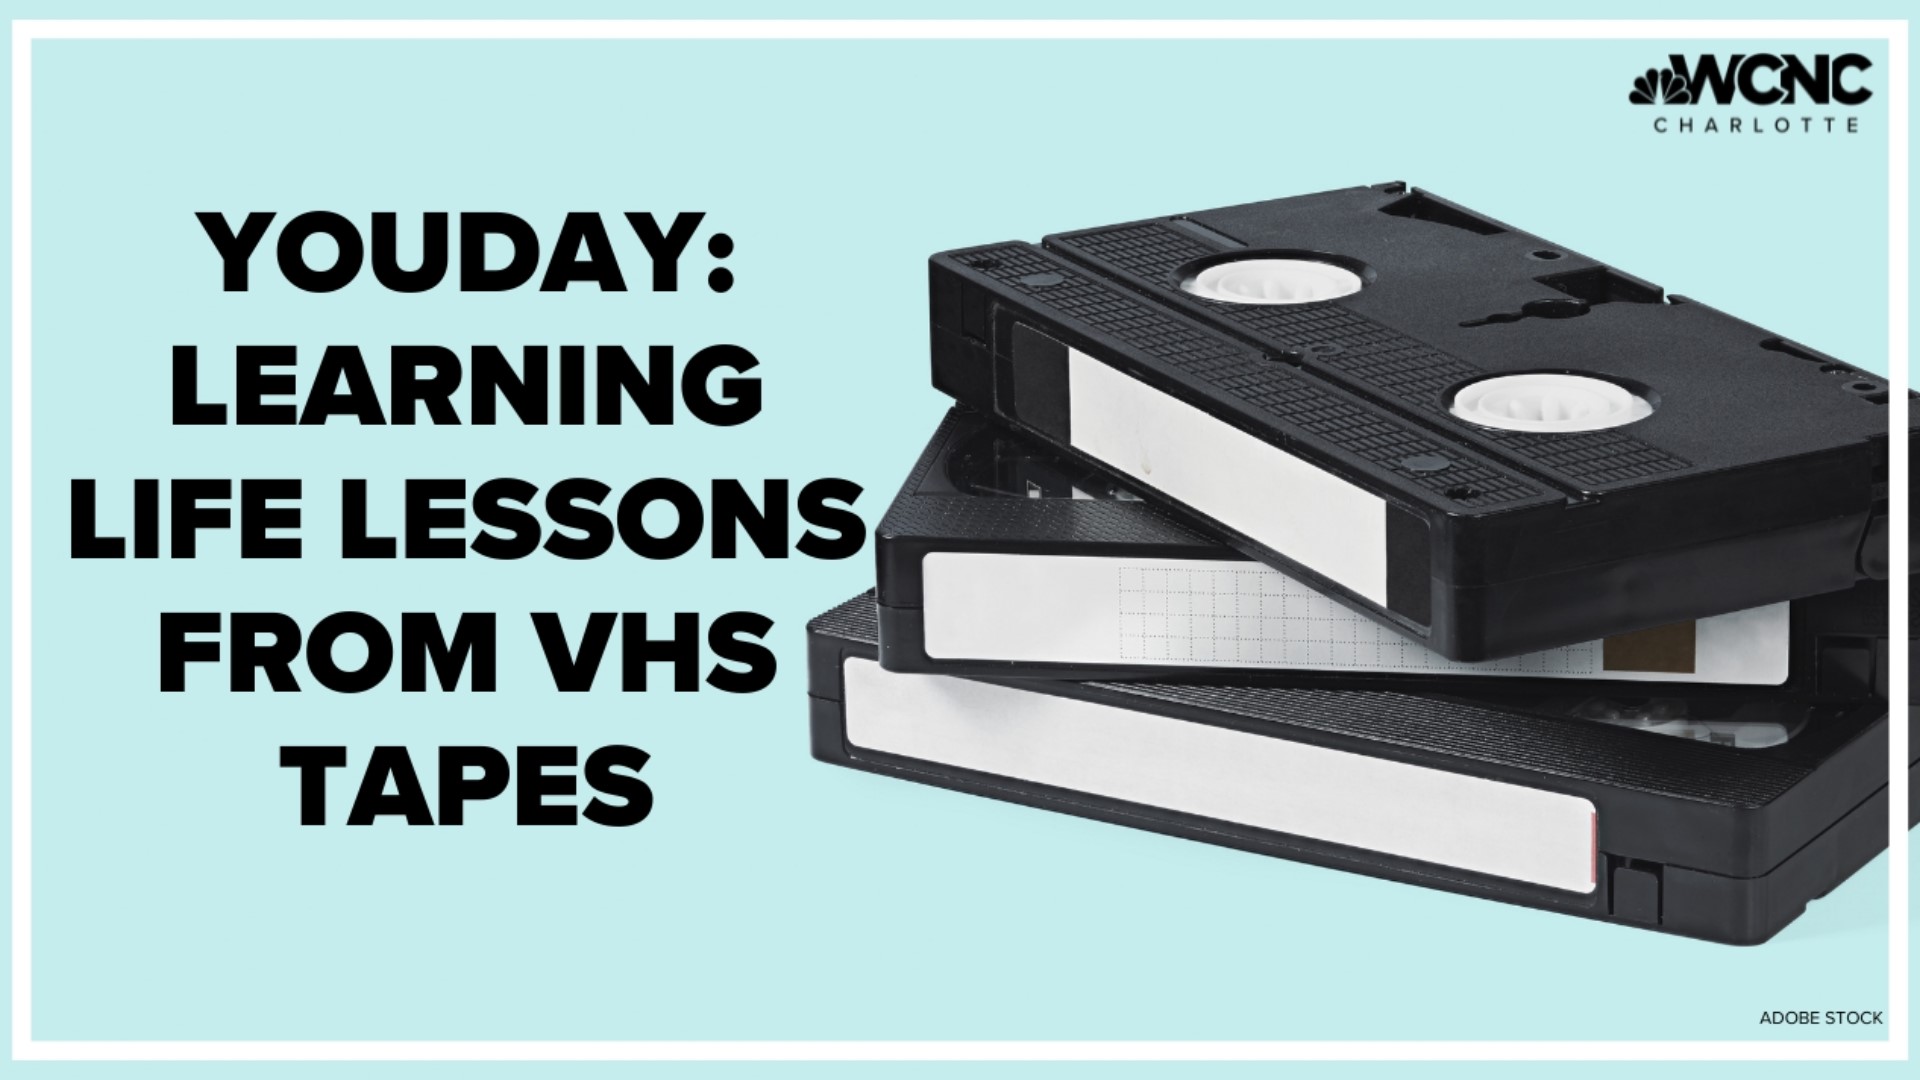 YouDay: Life lessons learned from a VHS tape